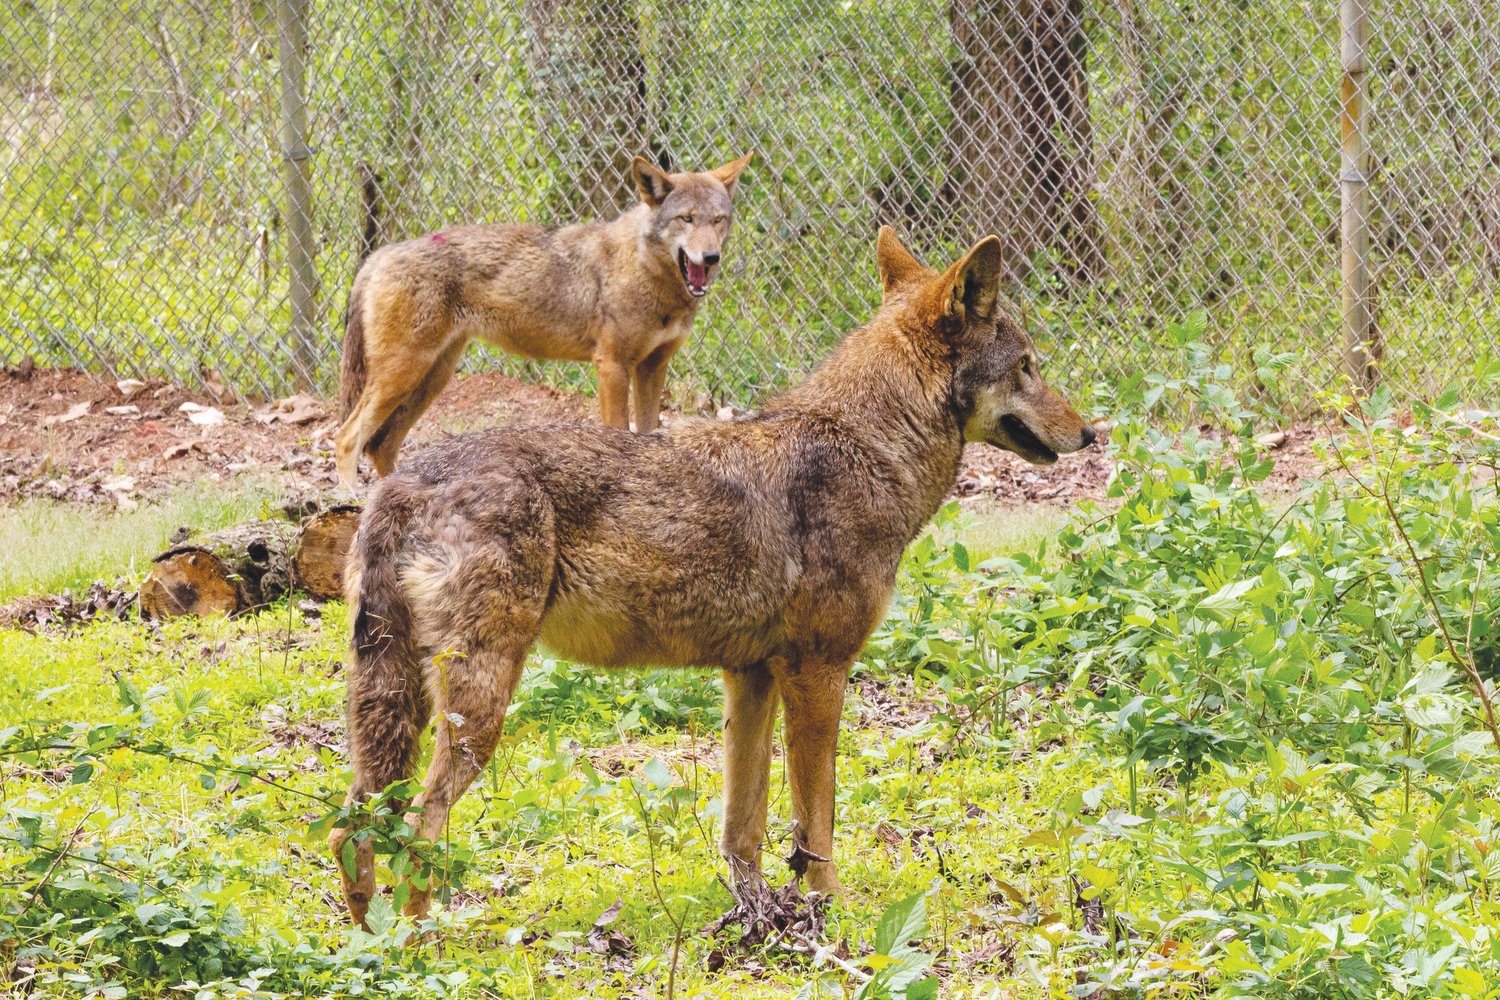 Mist (in rear of photo) and Caroline, the two female red wolves now living at Carolina Tiger Rescue's Sanctuary.